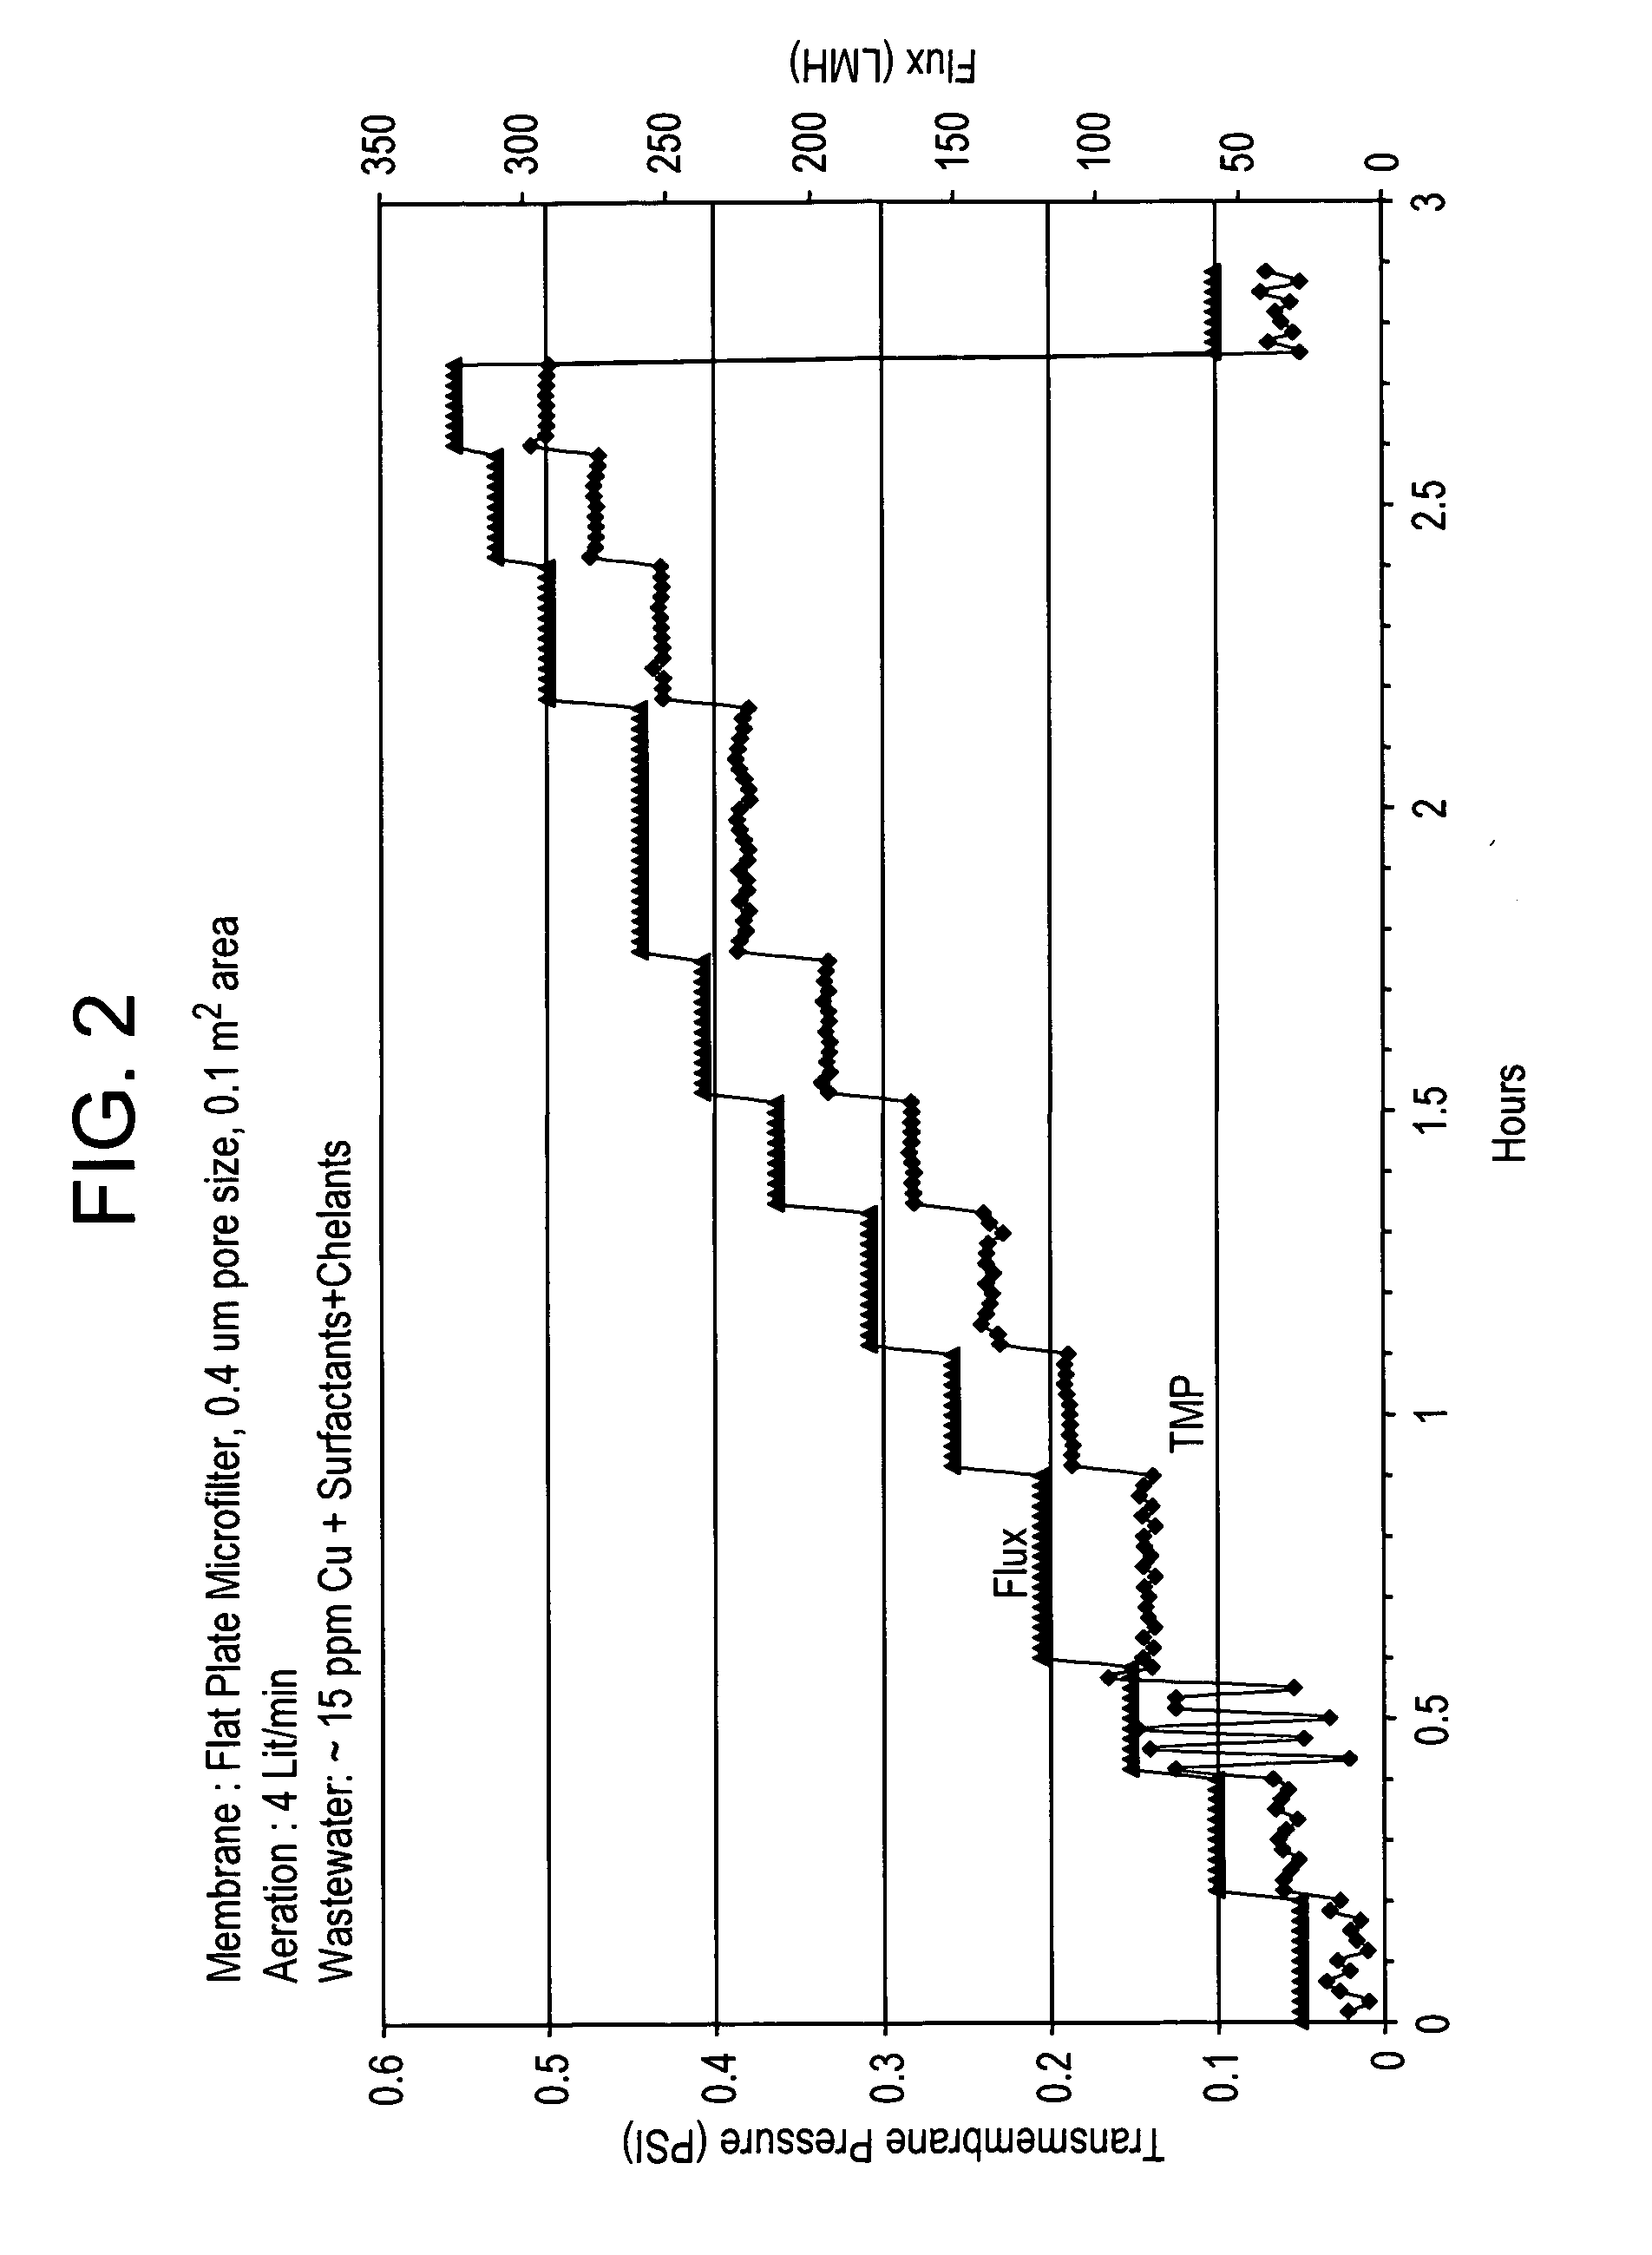 Method of heavy metal removal from industrial wastewater using submerged ultrafiltration or microfiltration membranes